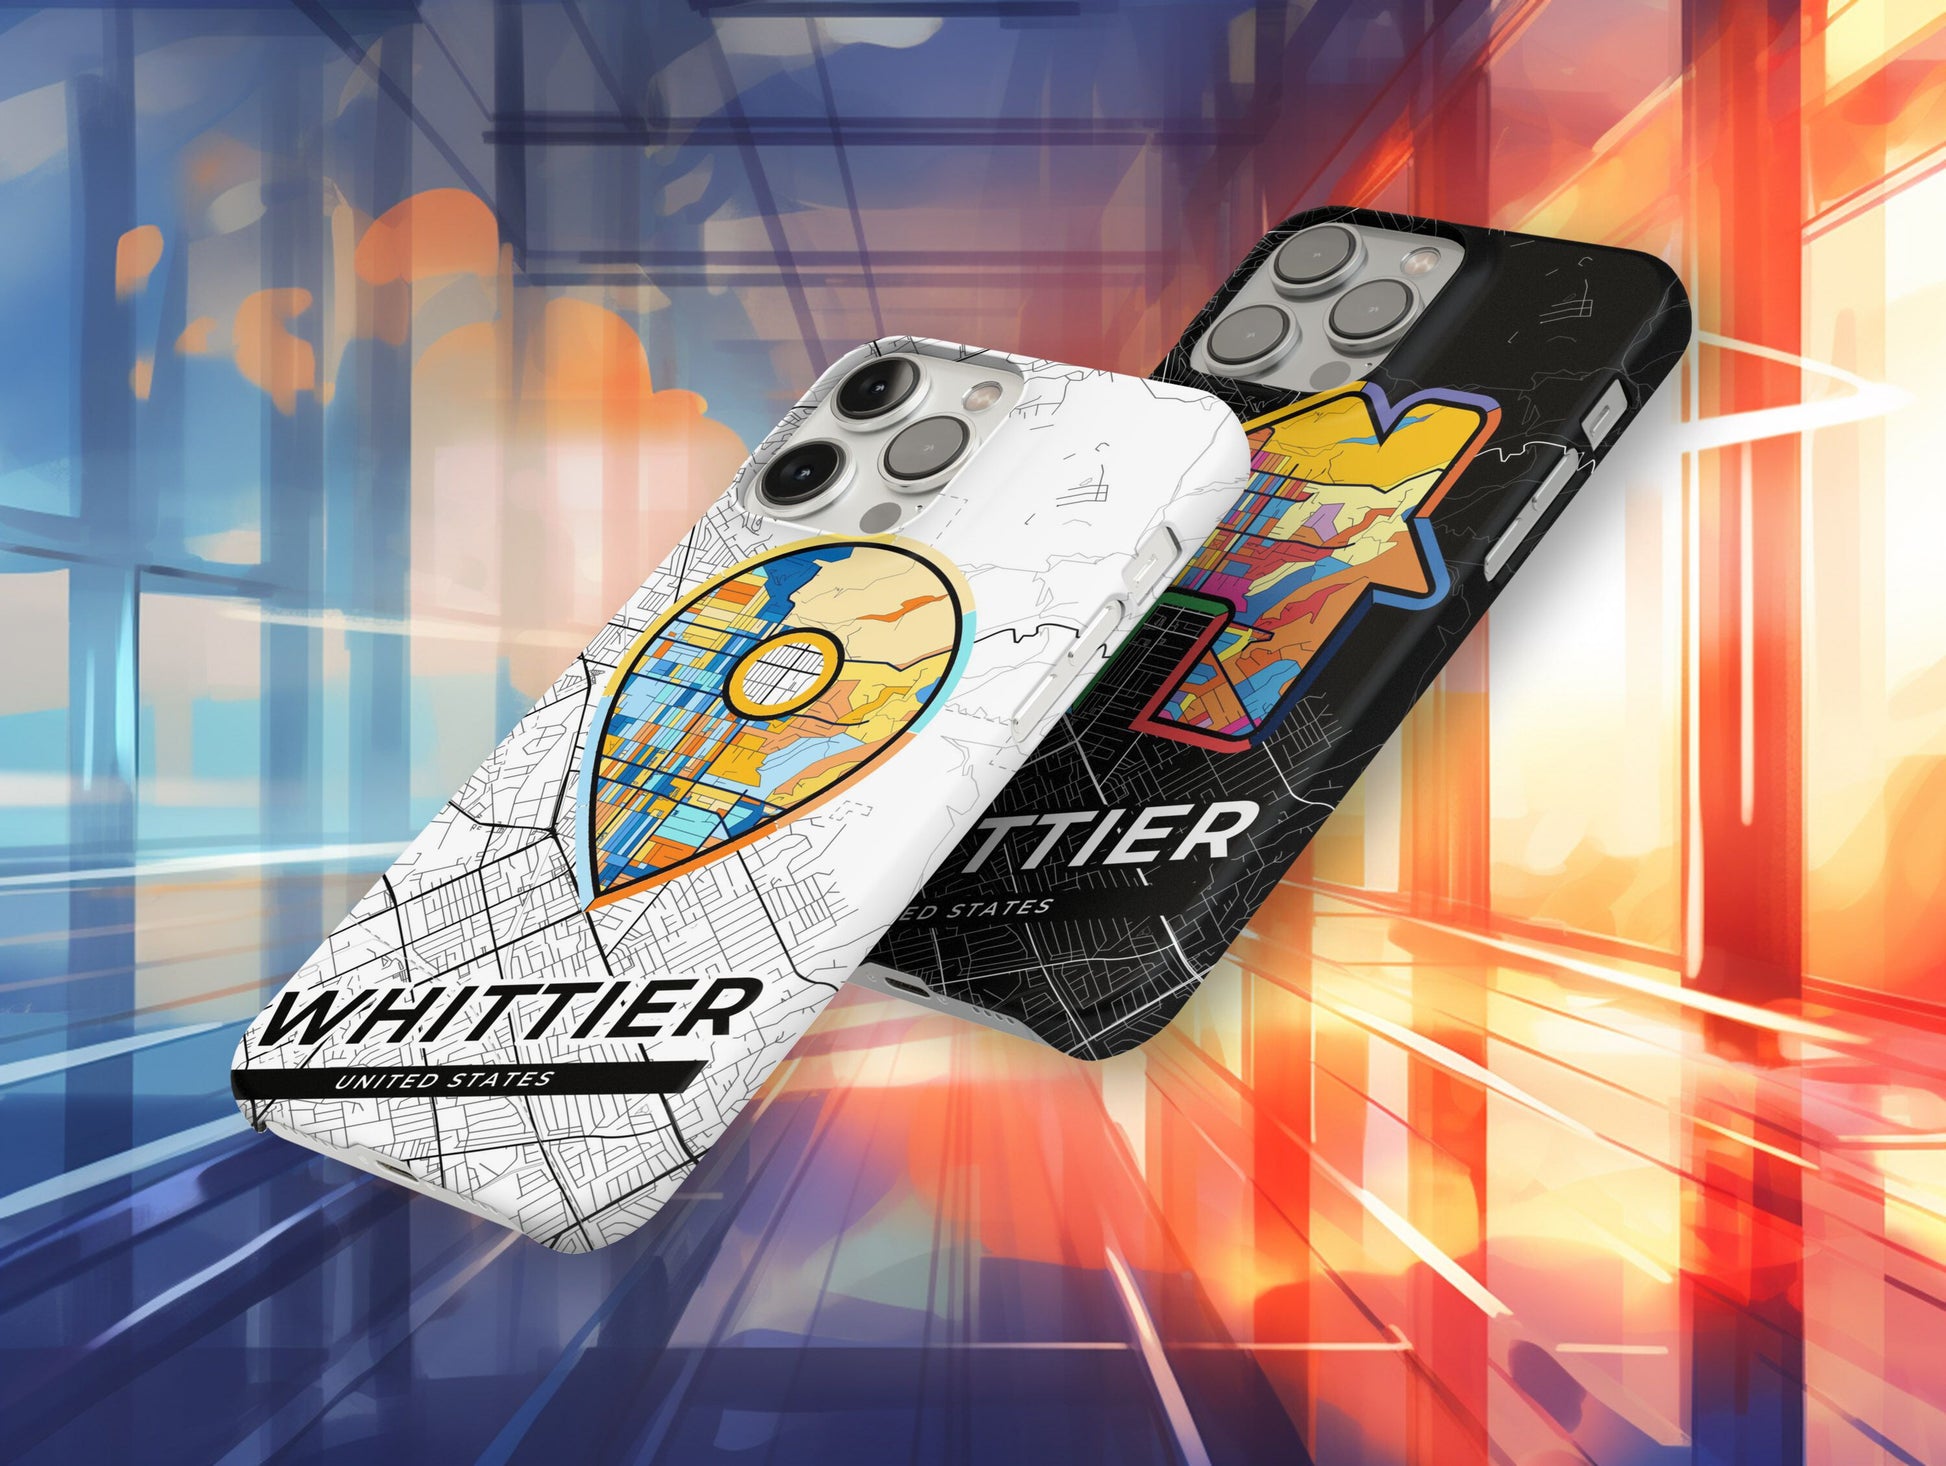 Whittier California slim phone case with colorful icon